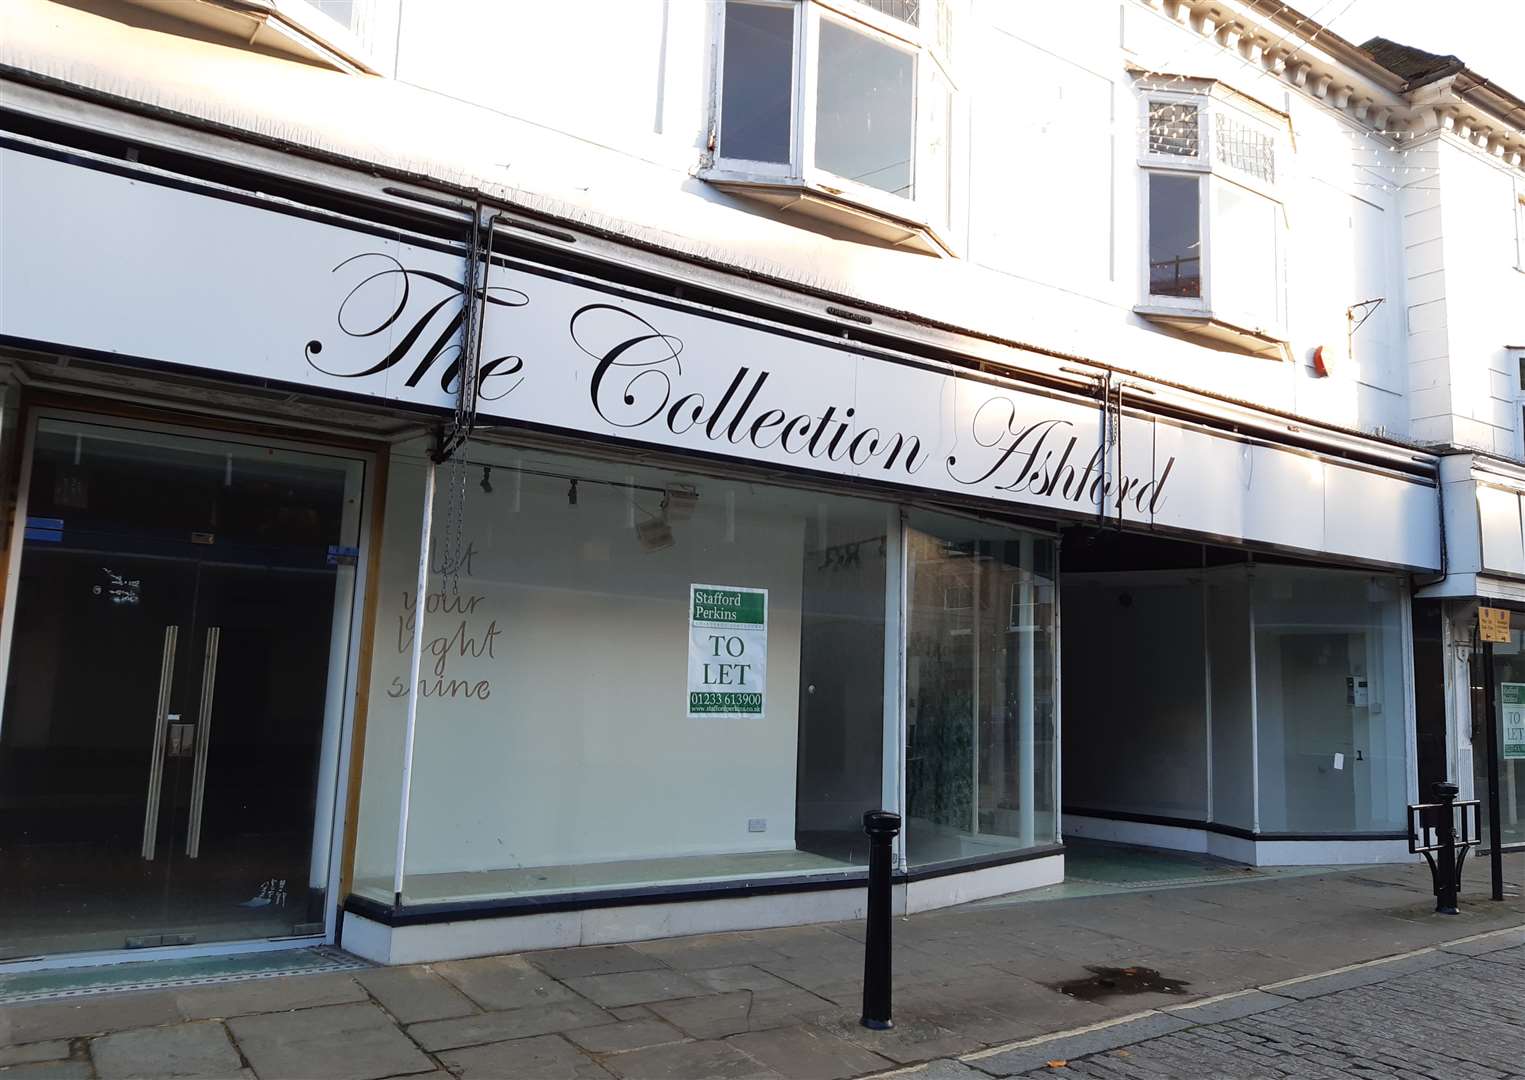 The Collection site in North Street was previously Merchant Chandler; it could now become a multi-cuisine restaurant